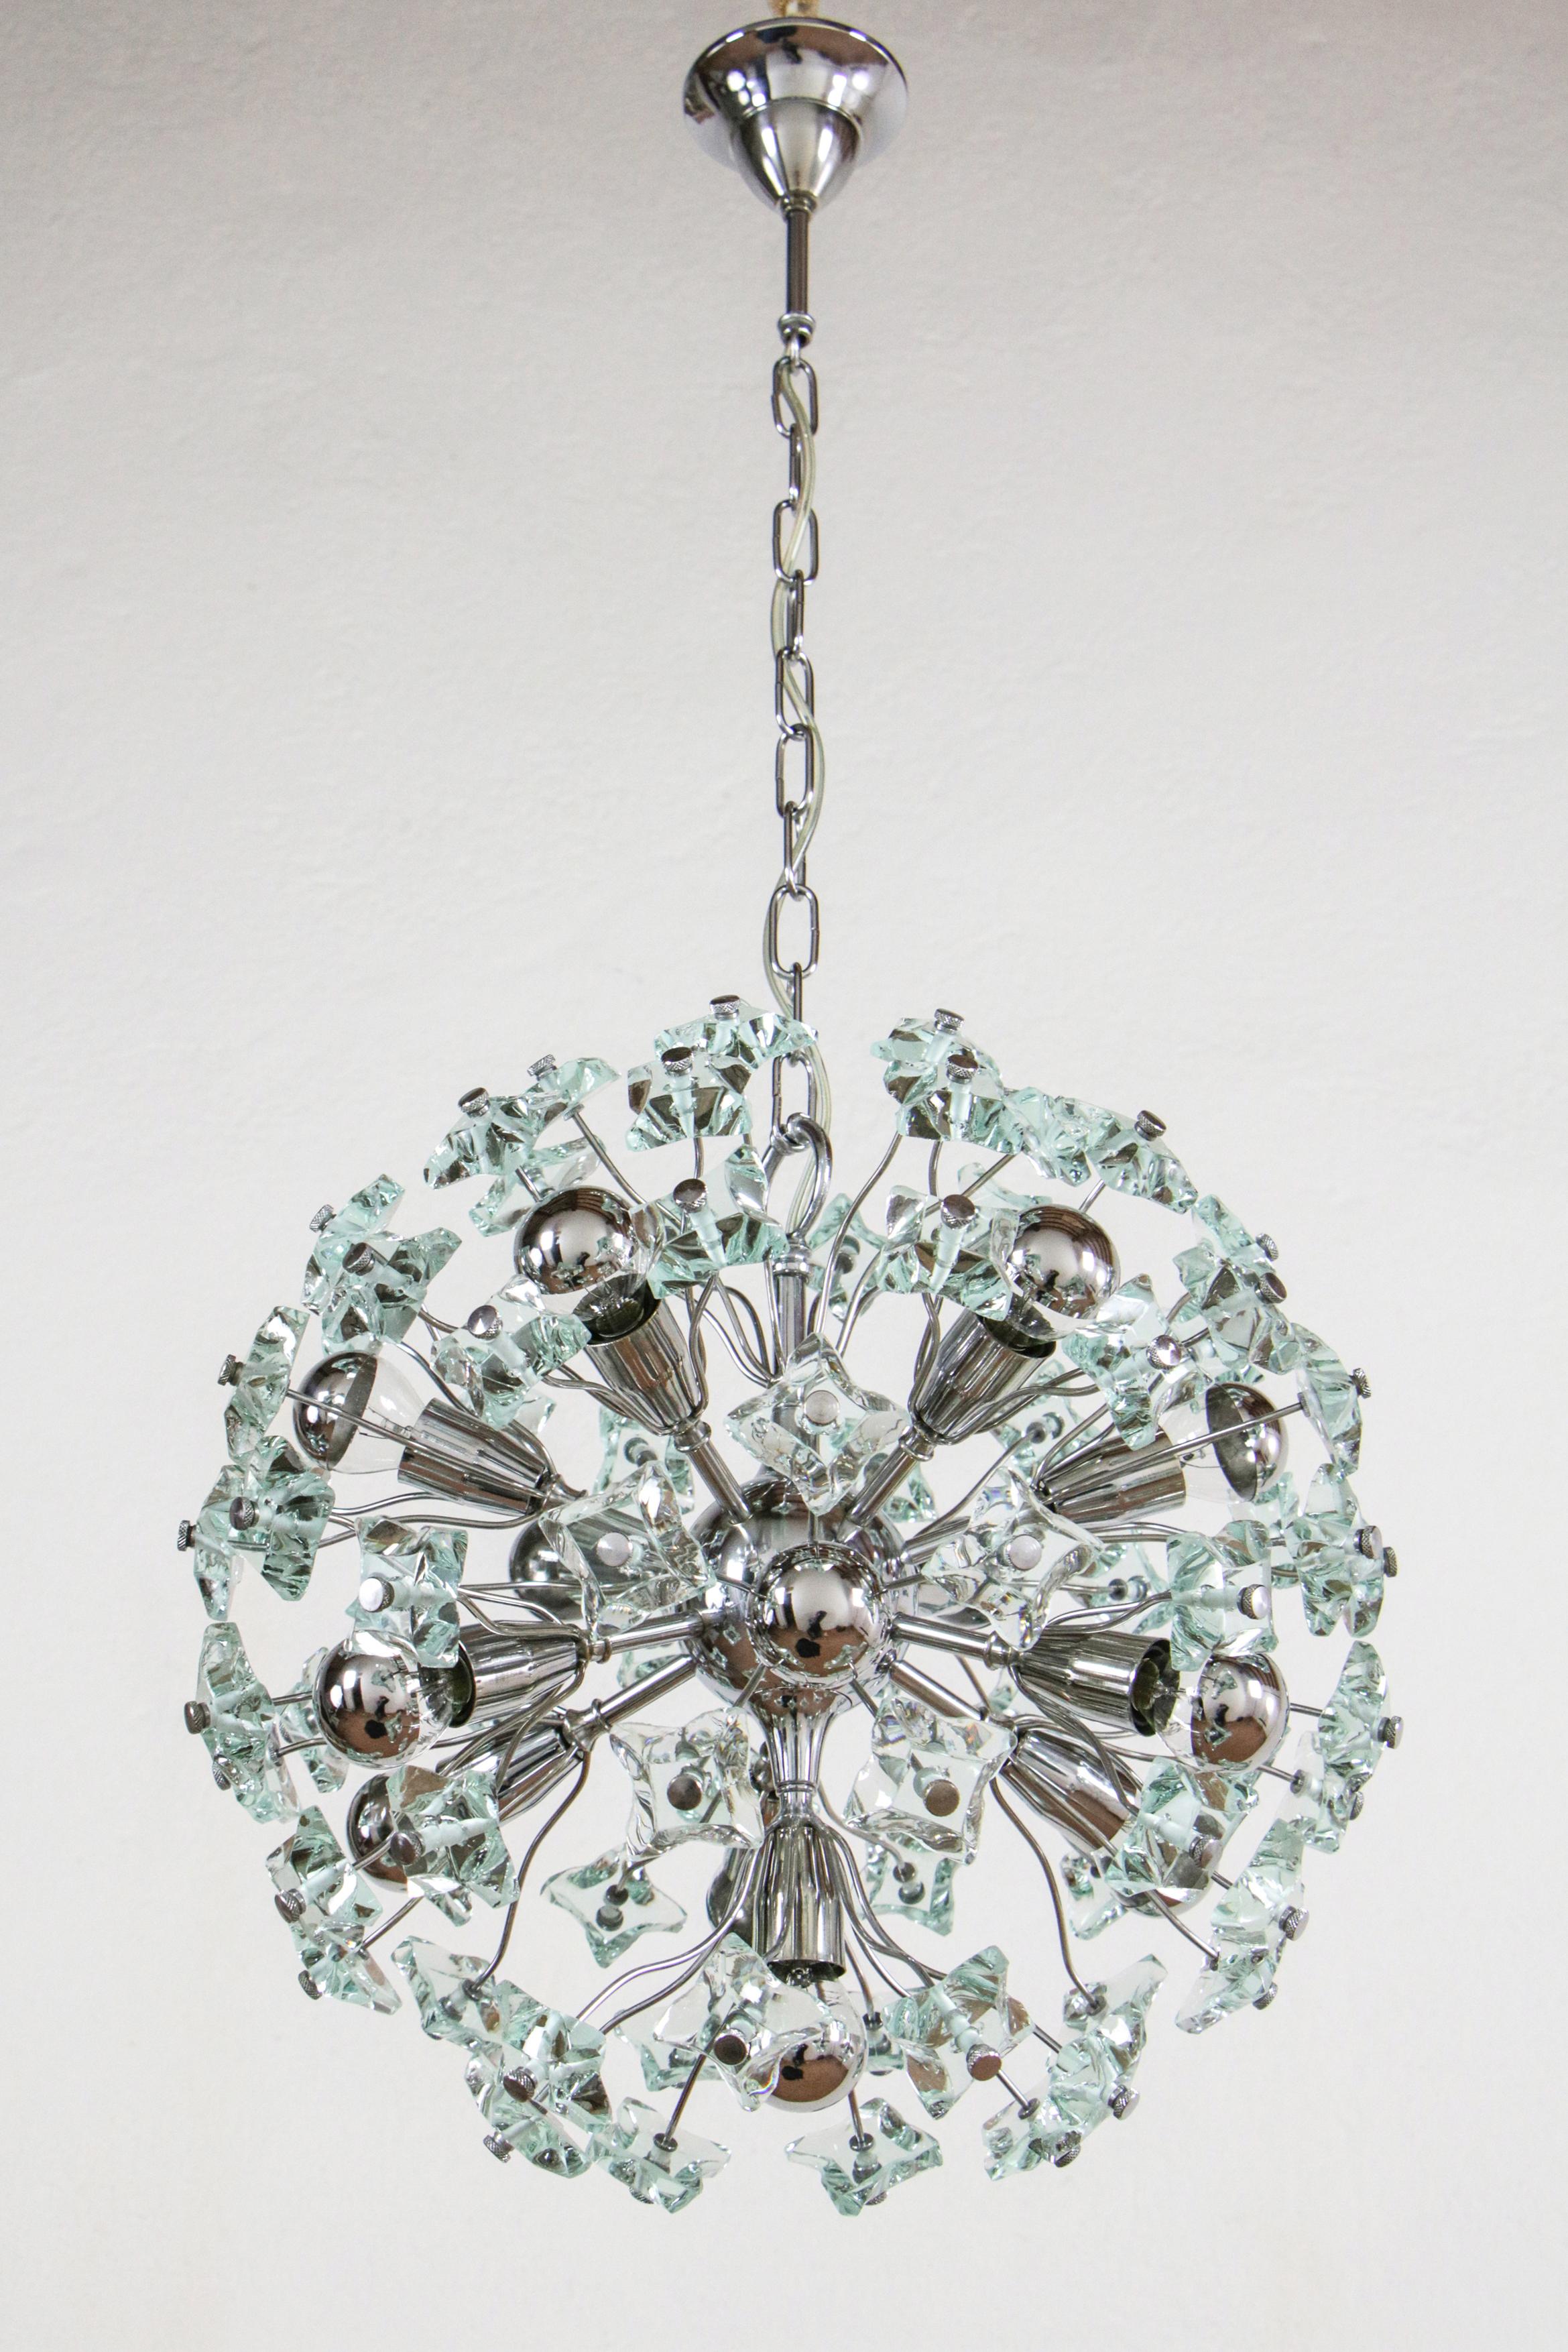 Italian Space Age Sputnik Chandelier Attributed to Fontana Arte, 1960s In Good Condition For Sale In Traversetolo, IT